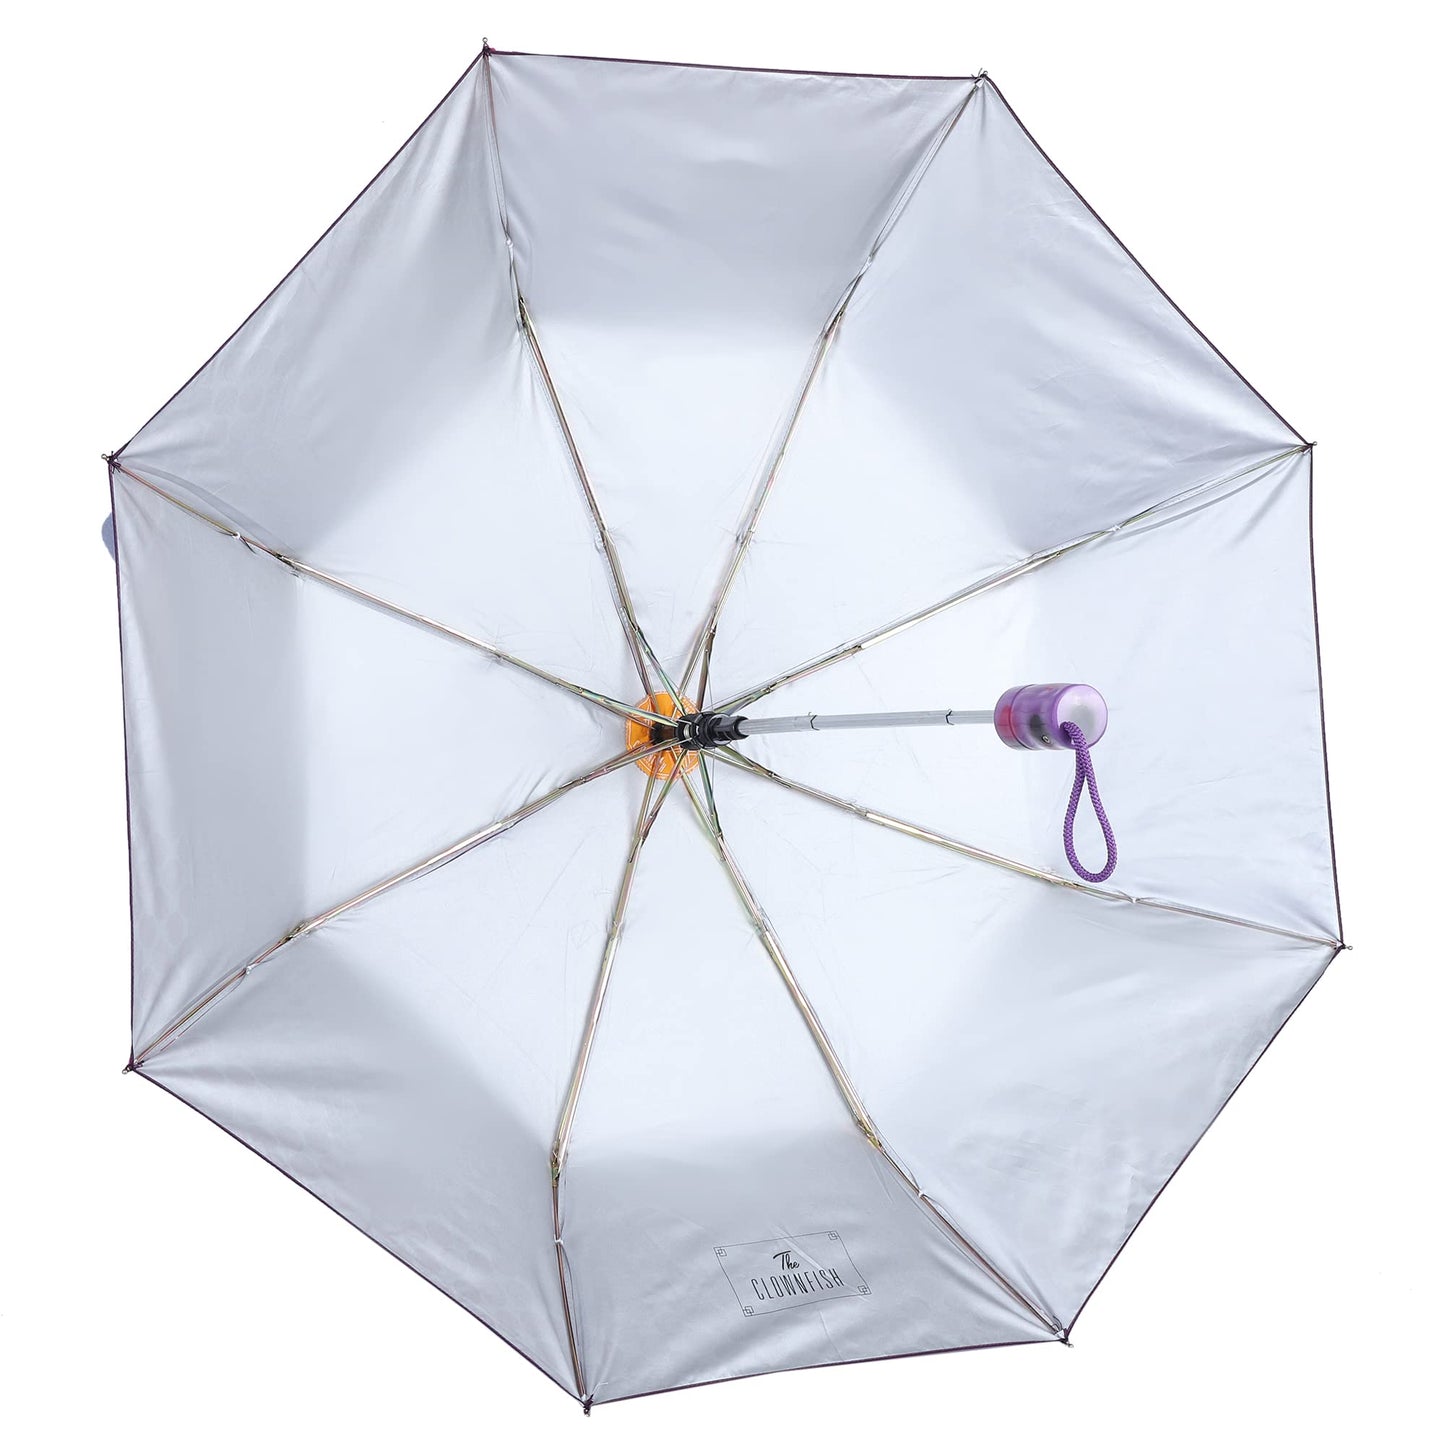 THE CLOWNFISH Umbrella 3 Fold Auto Open Waterproof Pongee Double Coated Silver Lined Umbrellas For Men and Women (Printed Design- Dark Pink)